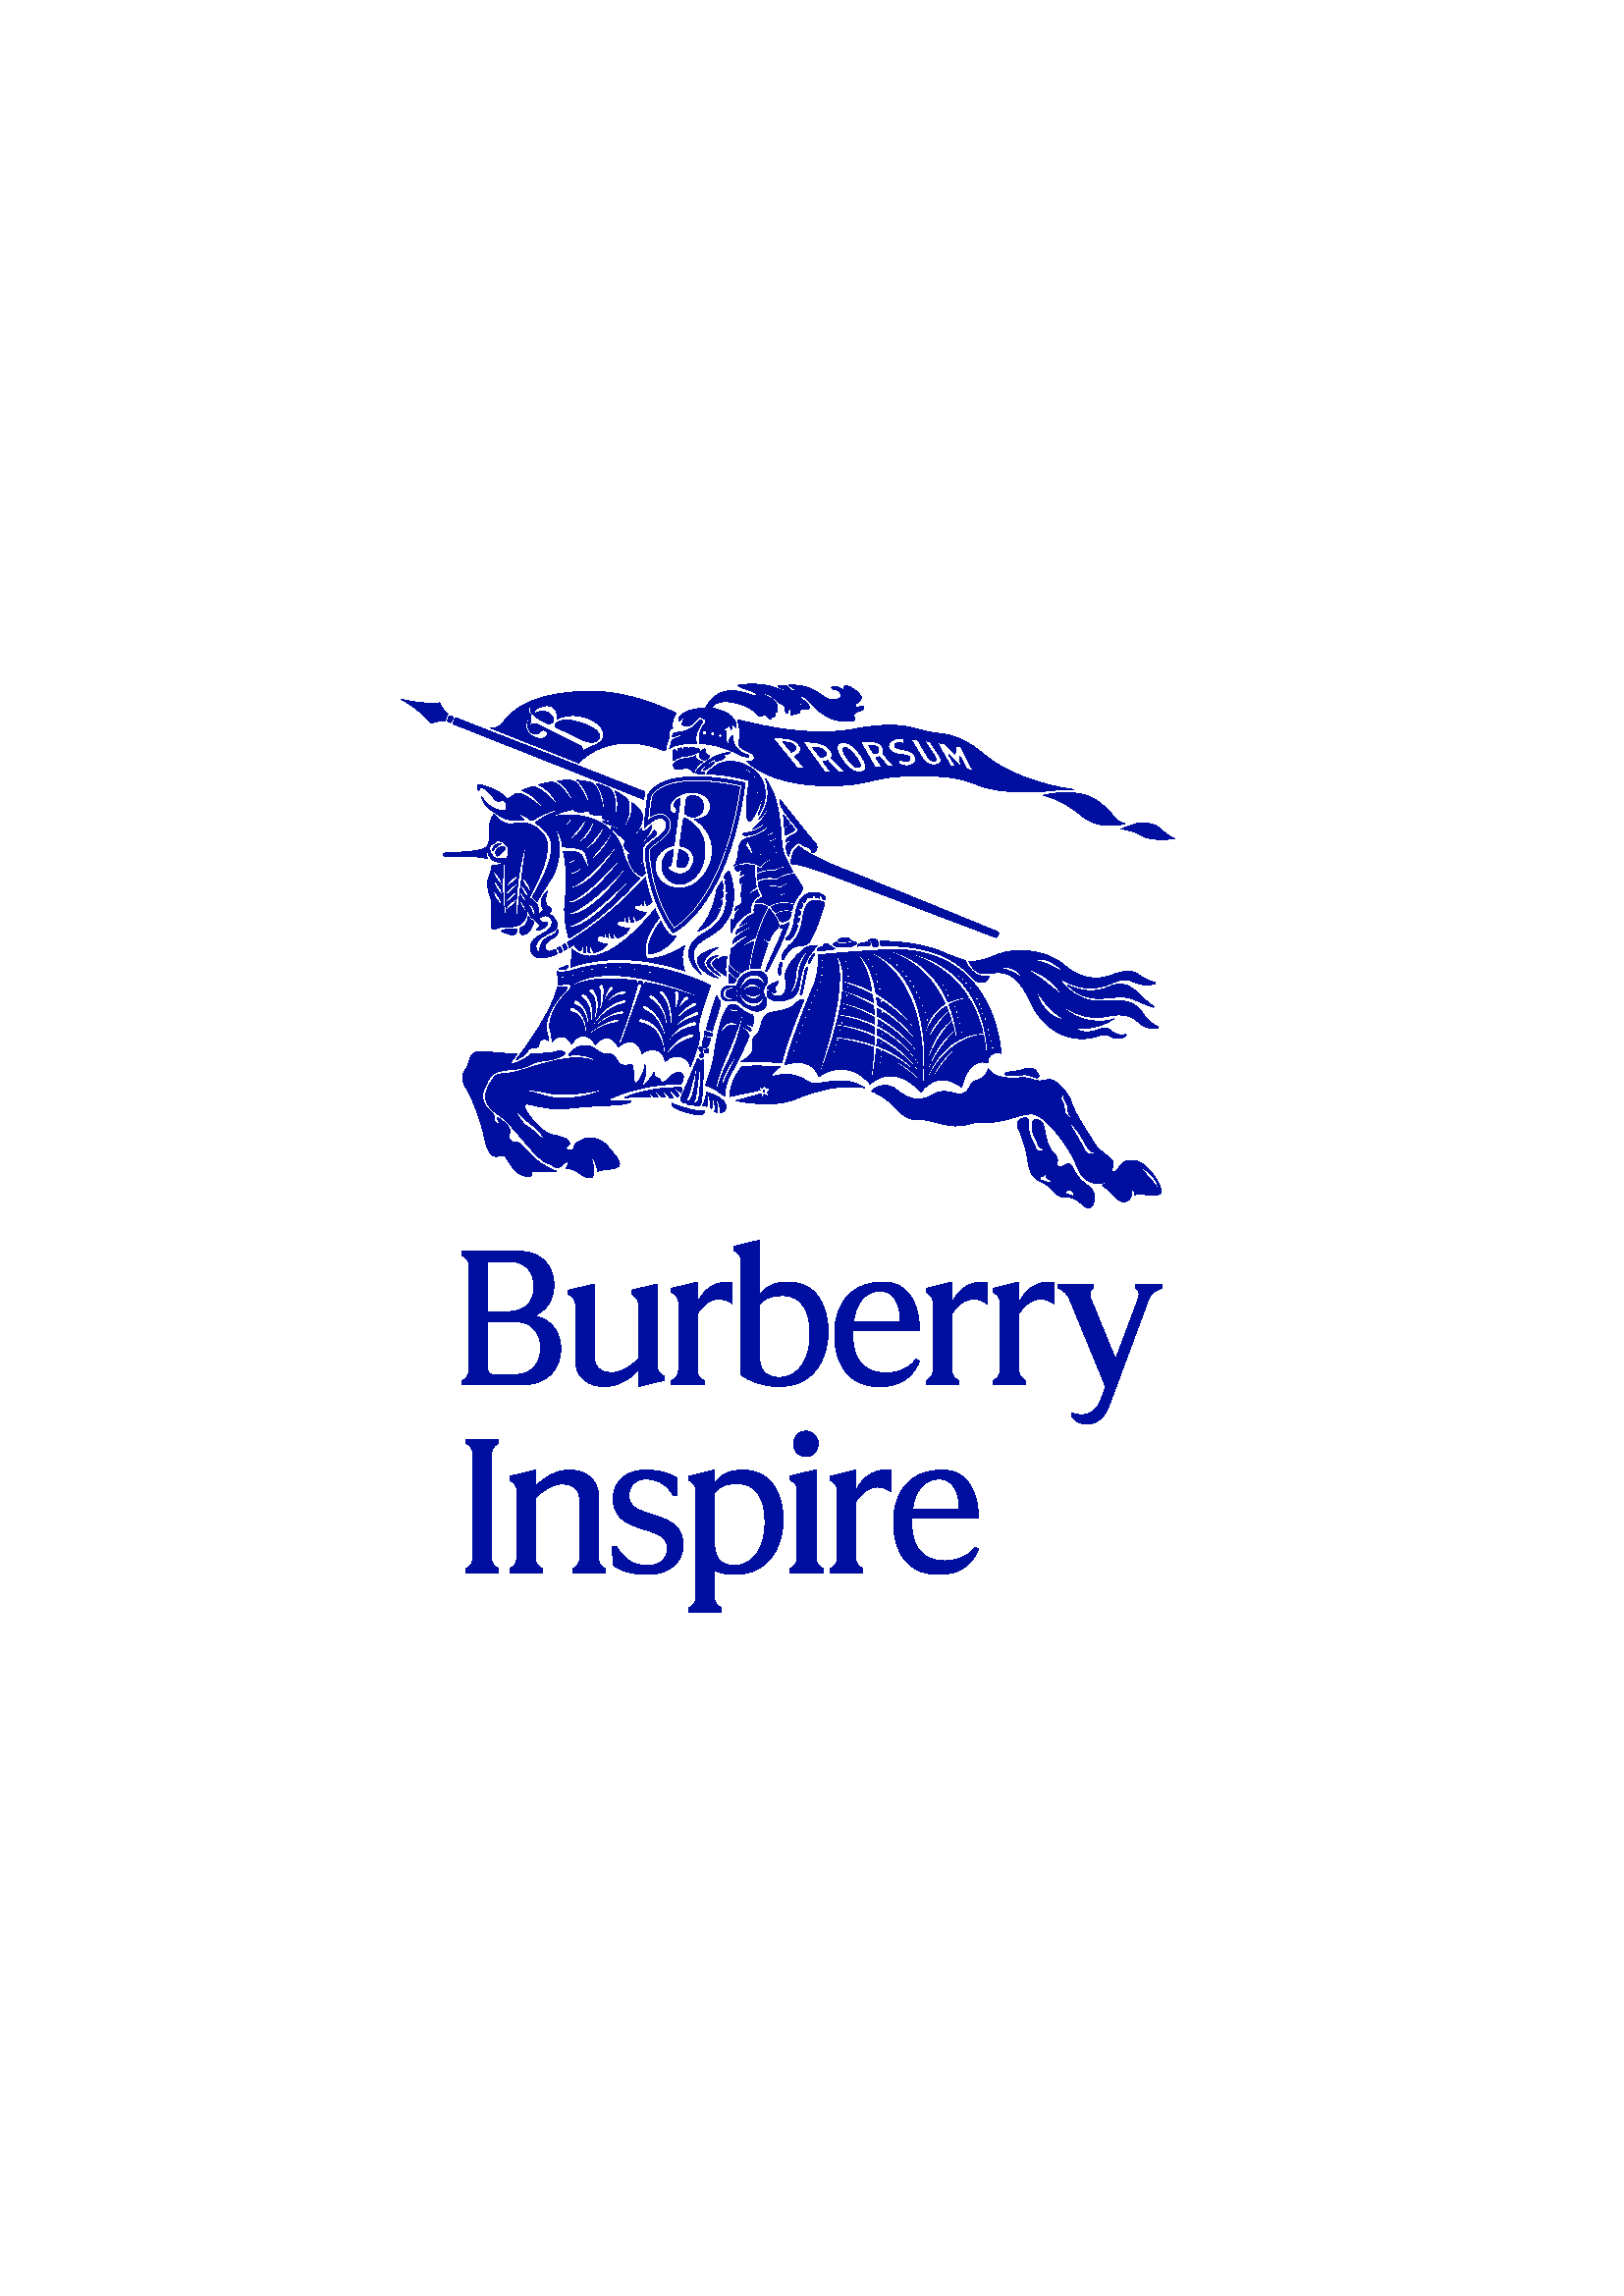 The Burberry Foundation logo (knight on horse)